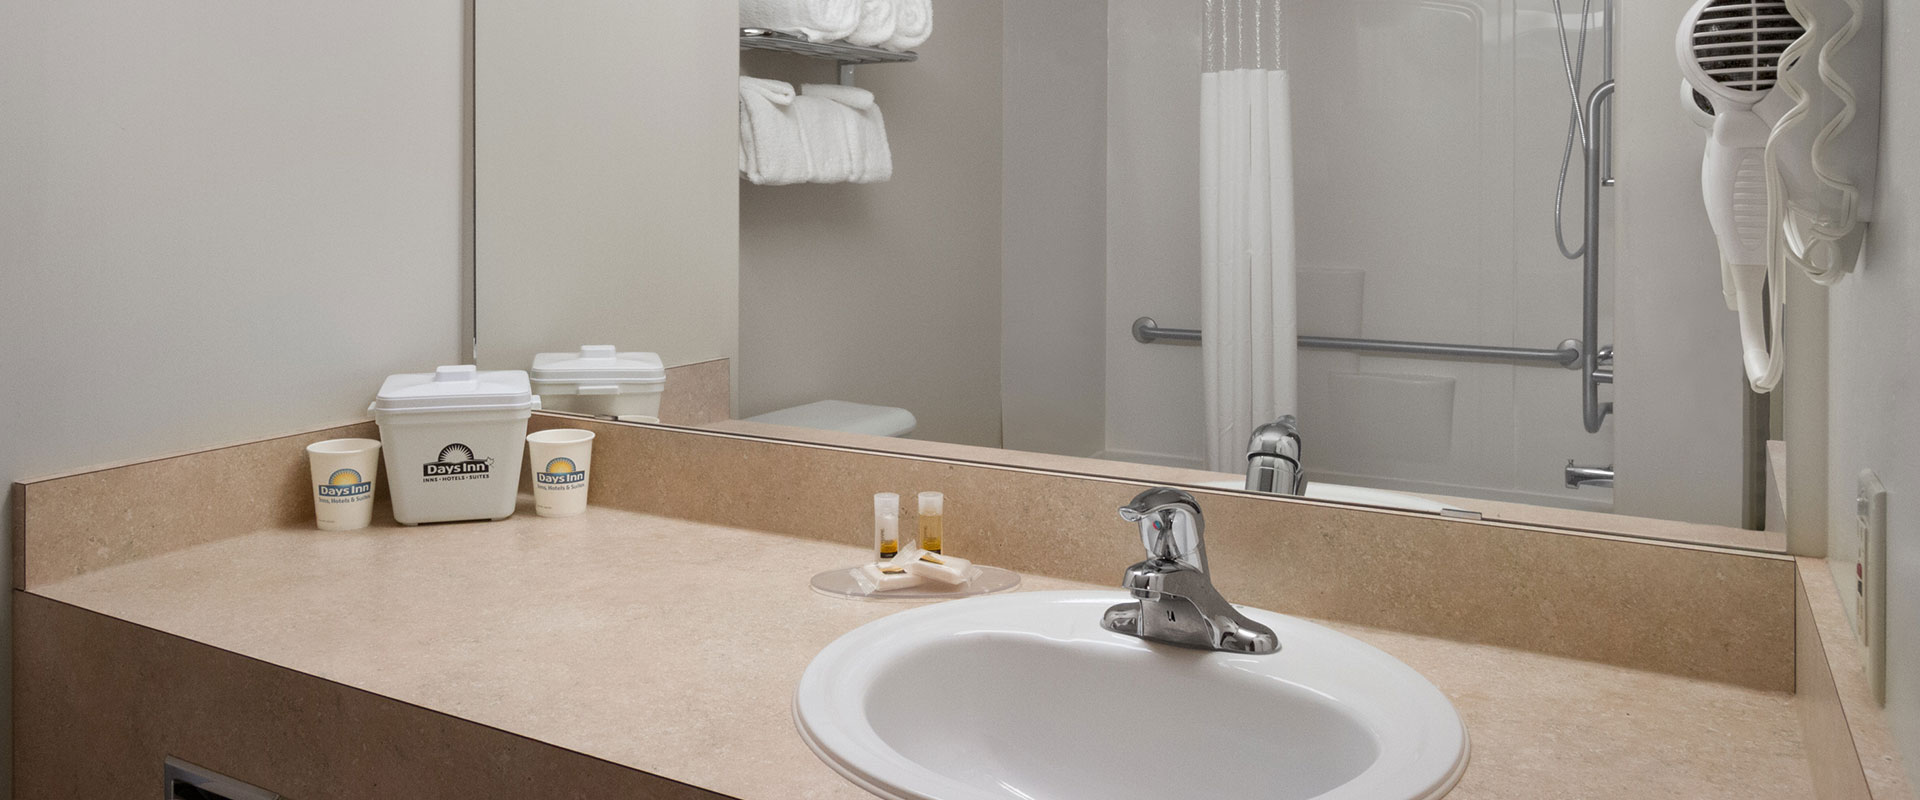 A typical bathroom suite at Days Inn Red Deer, Alberta features stocked linen, hair dryer, complimentary soap and paper cups with company logo.
